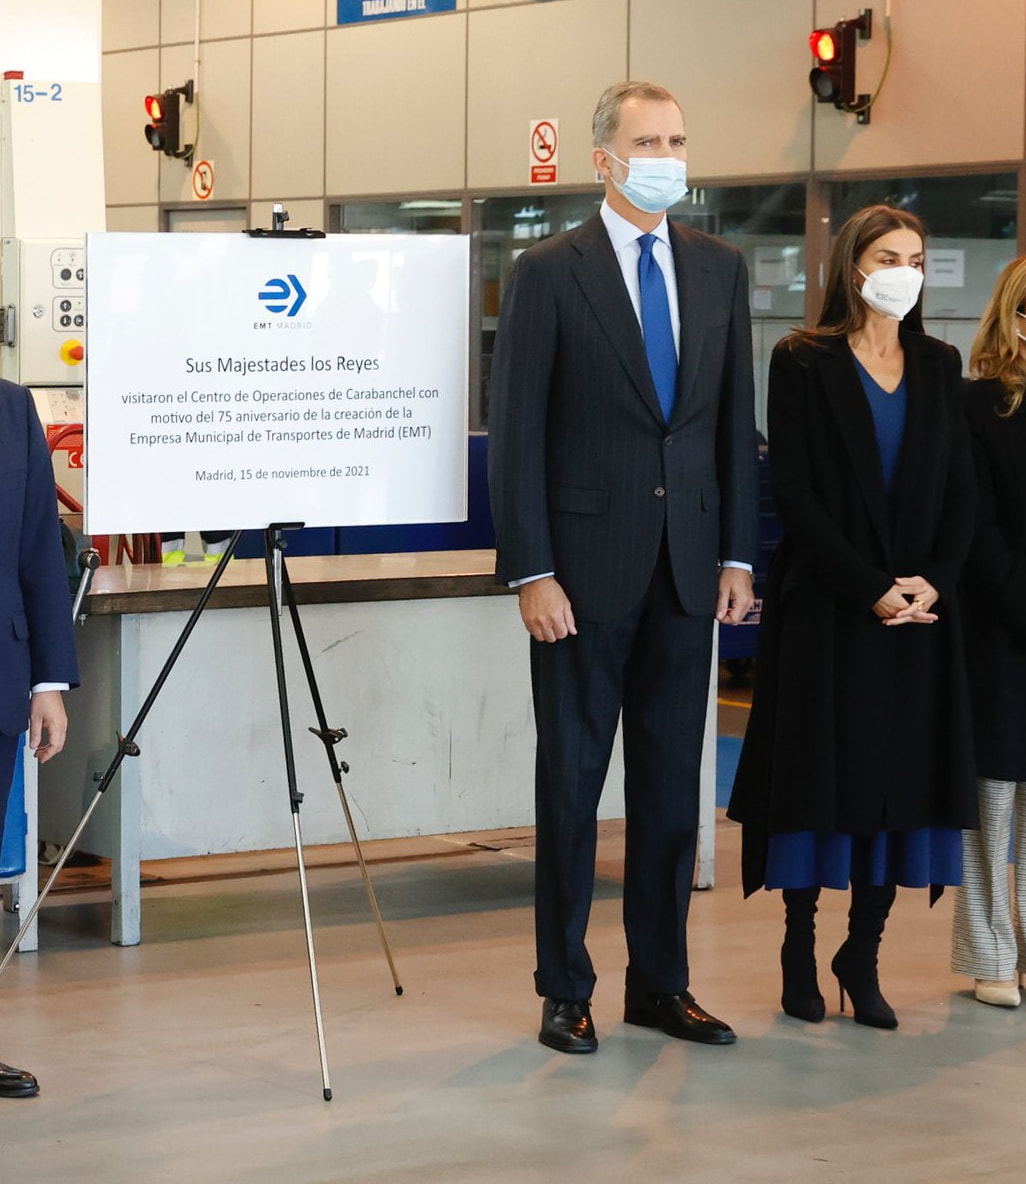 King Felipe VI and Queen Letizia of Spain presided over the opening ceremony of the commemoration of the 75th anniversary of the creation of the Municipal Transport Company of Madrid (EMT Madrid), at the Centro de Operaciones de EMT Madrid in Carabanchel, Madrid.